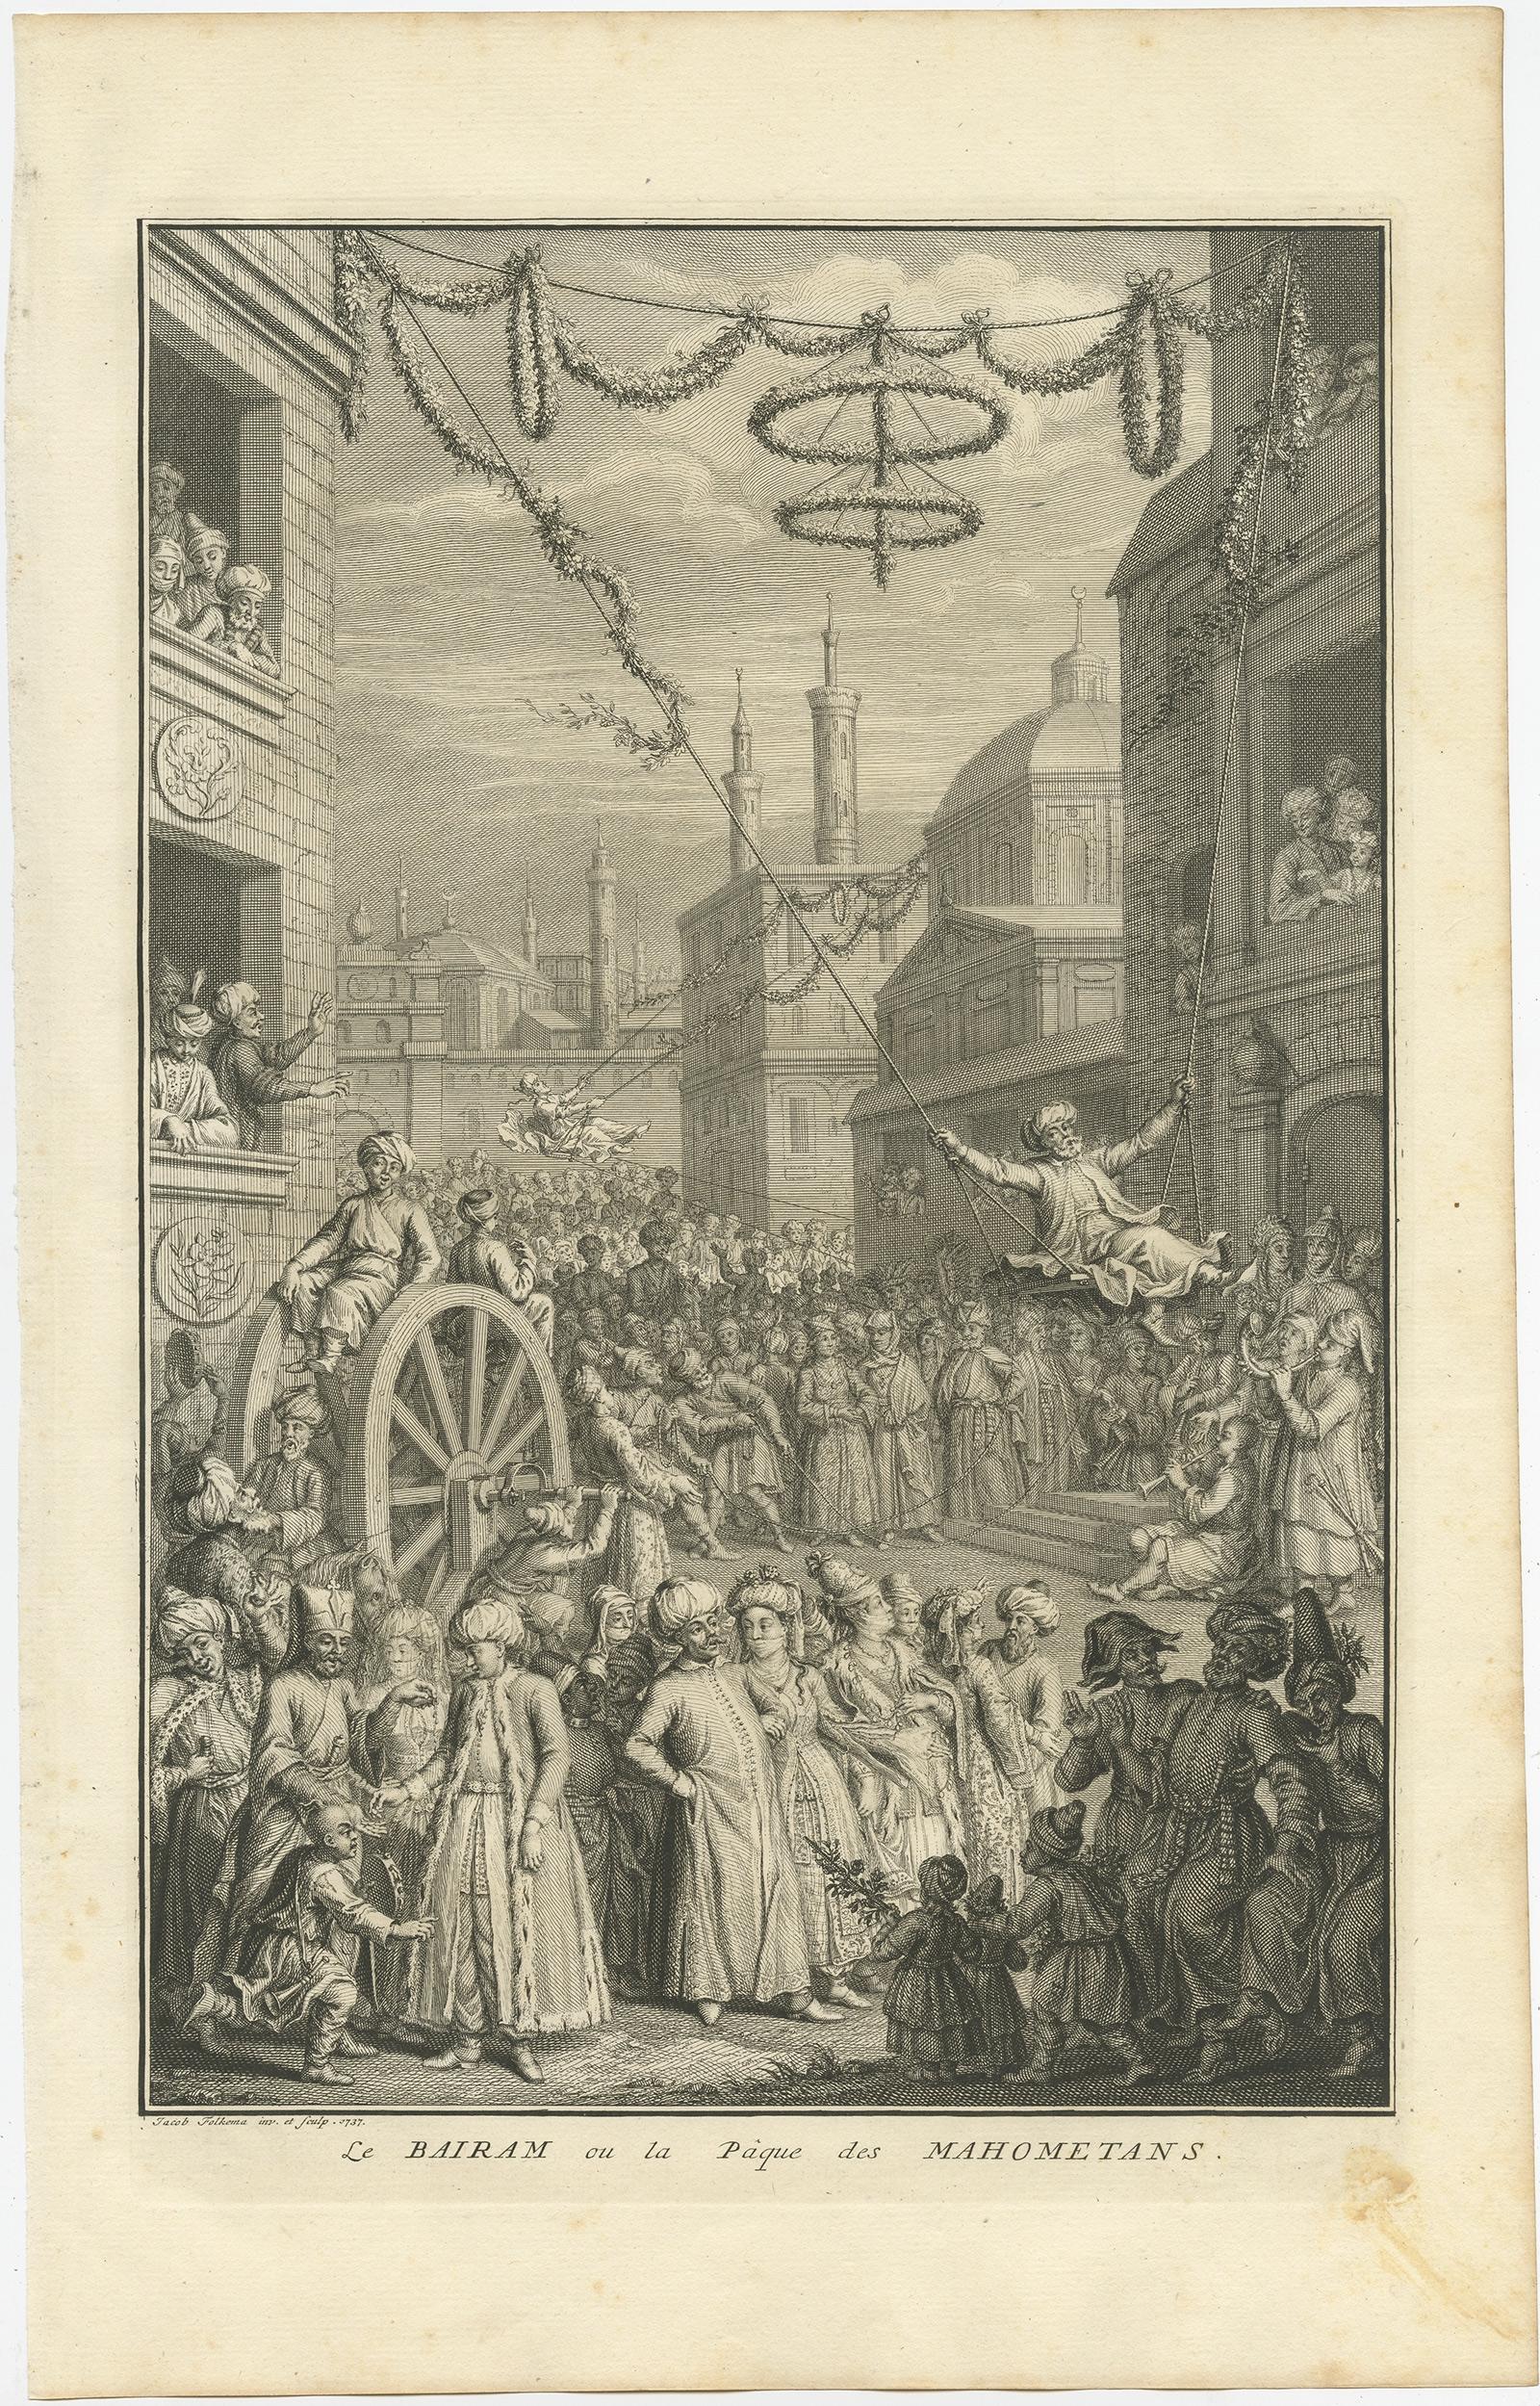 Antique print titled 'Le Bairam ou la Paque des Mahometans'. 

Old print of the Bairam celebration, the Easter of the Muslims. Originates from 'Ceremonies et coutumes Religieuses...' , by A. Moubach.

Artists and Engravers: Bernard Picart was a